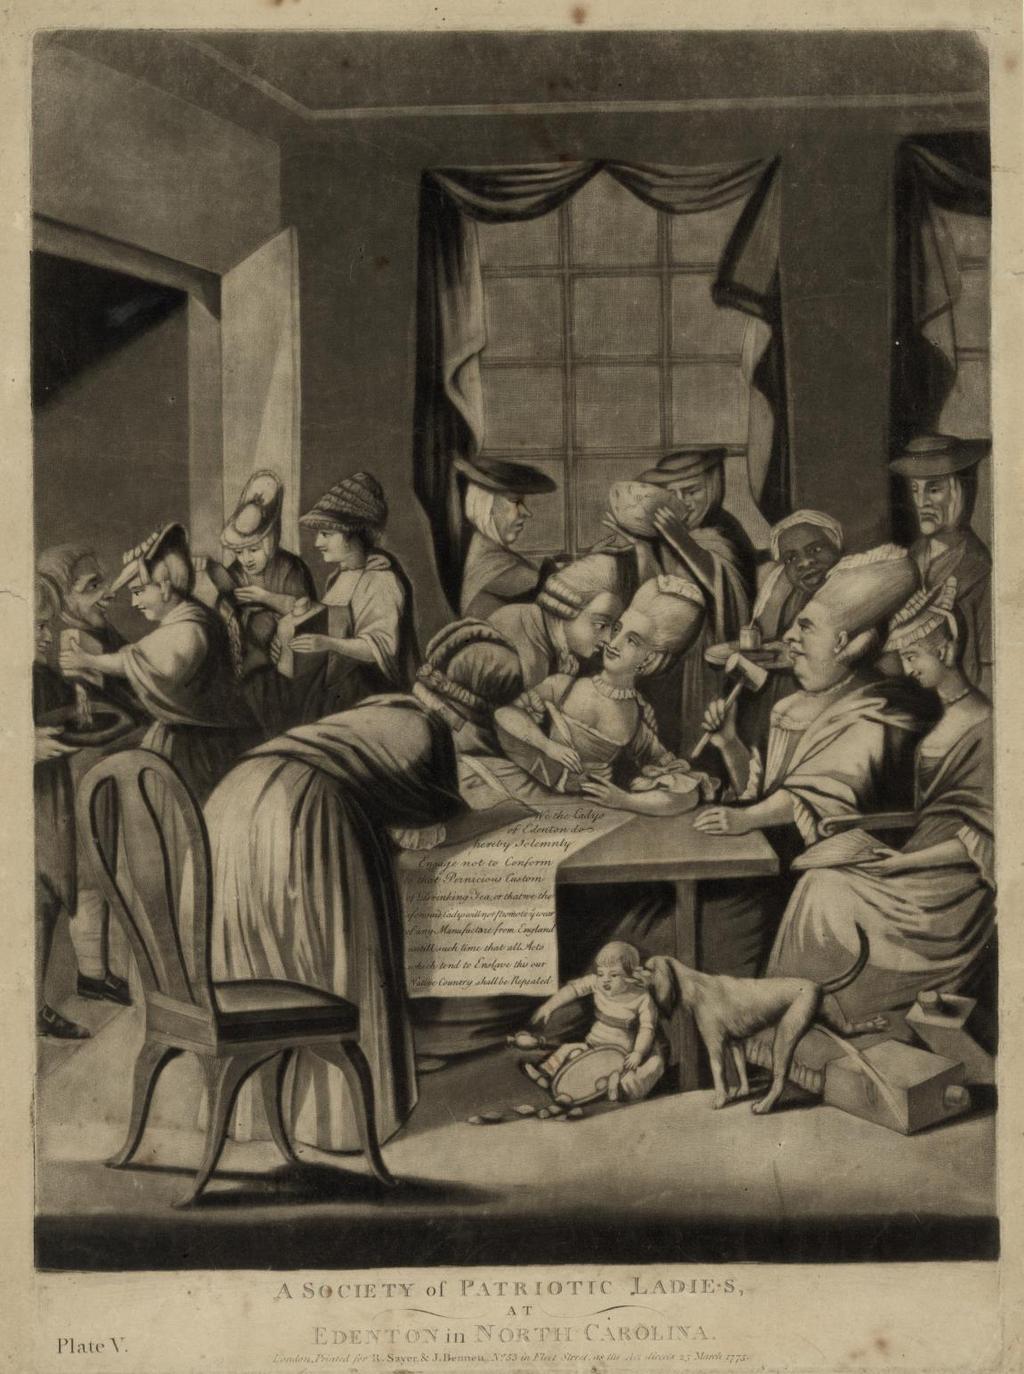 Image I-1: A Society of Patriotic Ladies, at Edenton in North Carolina This print, published in London in 1775, depicts a satirical take on reports that a society of ladies in Edenton, North Carolina